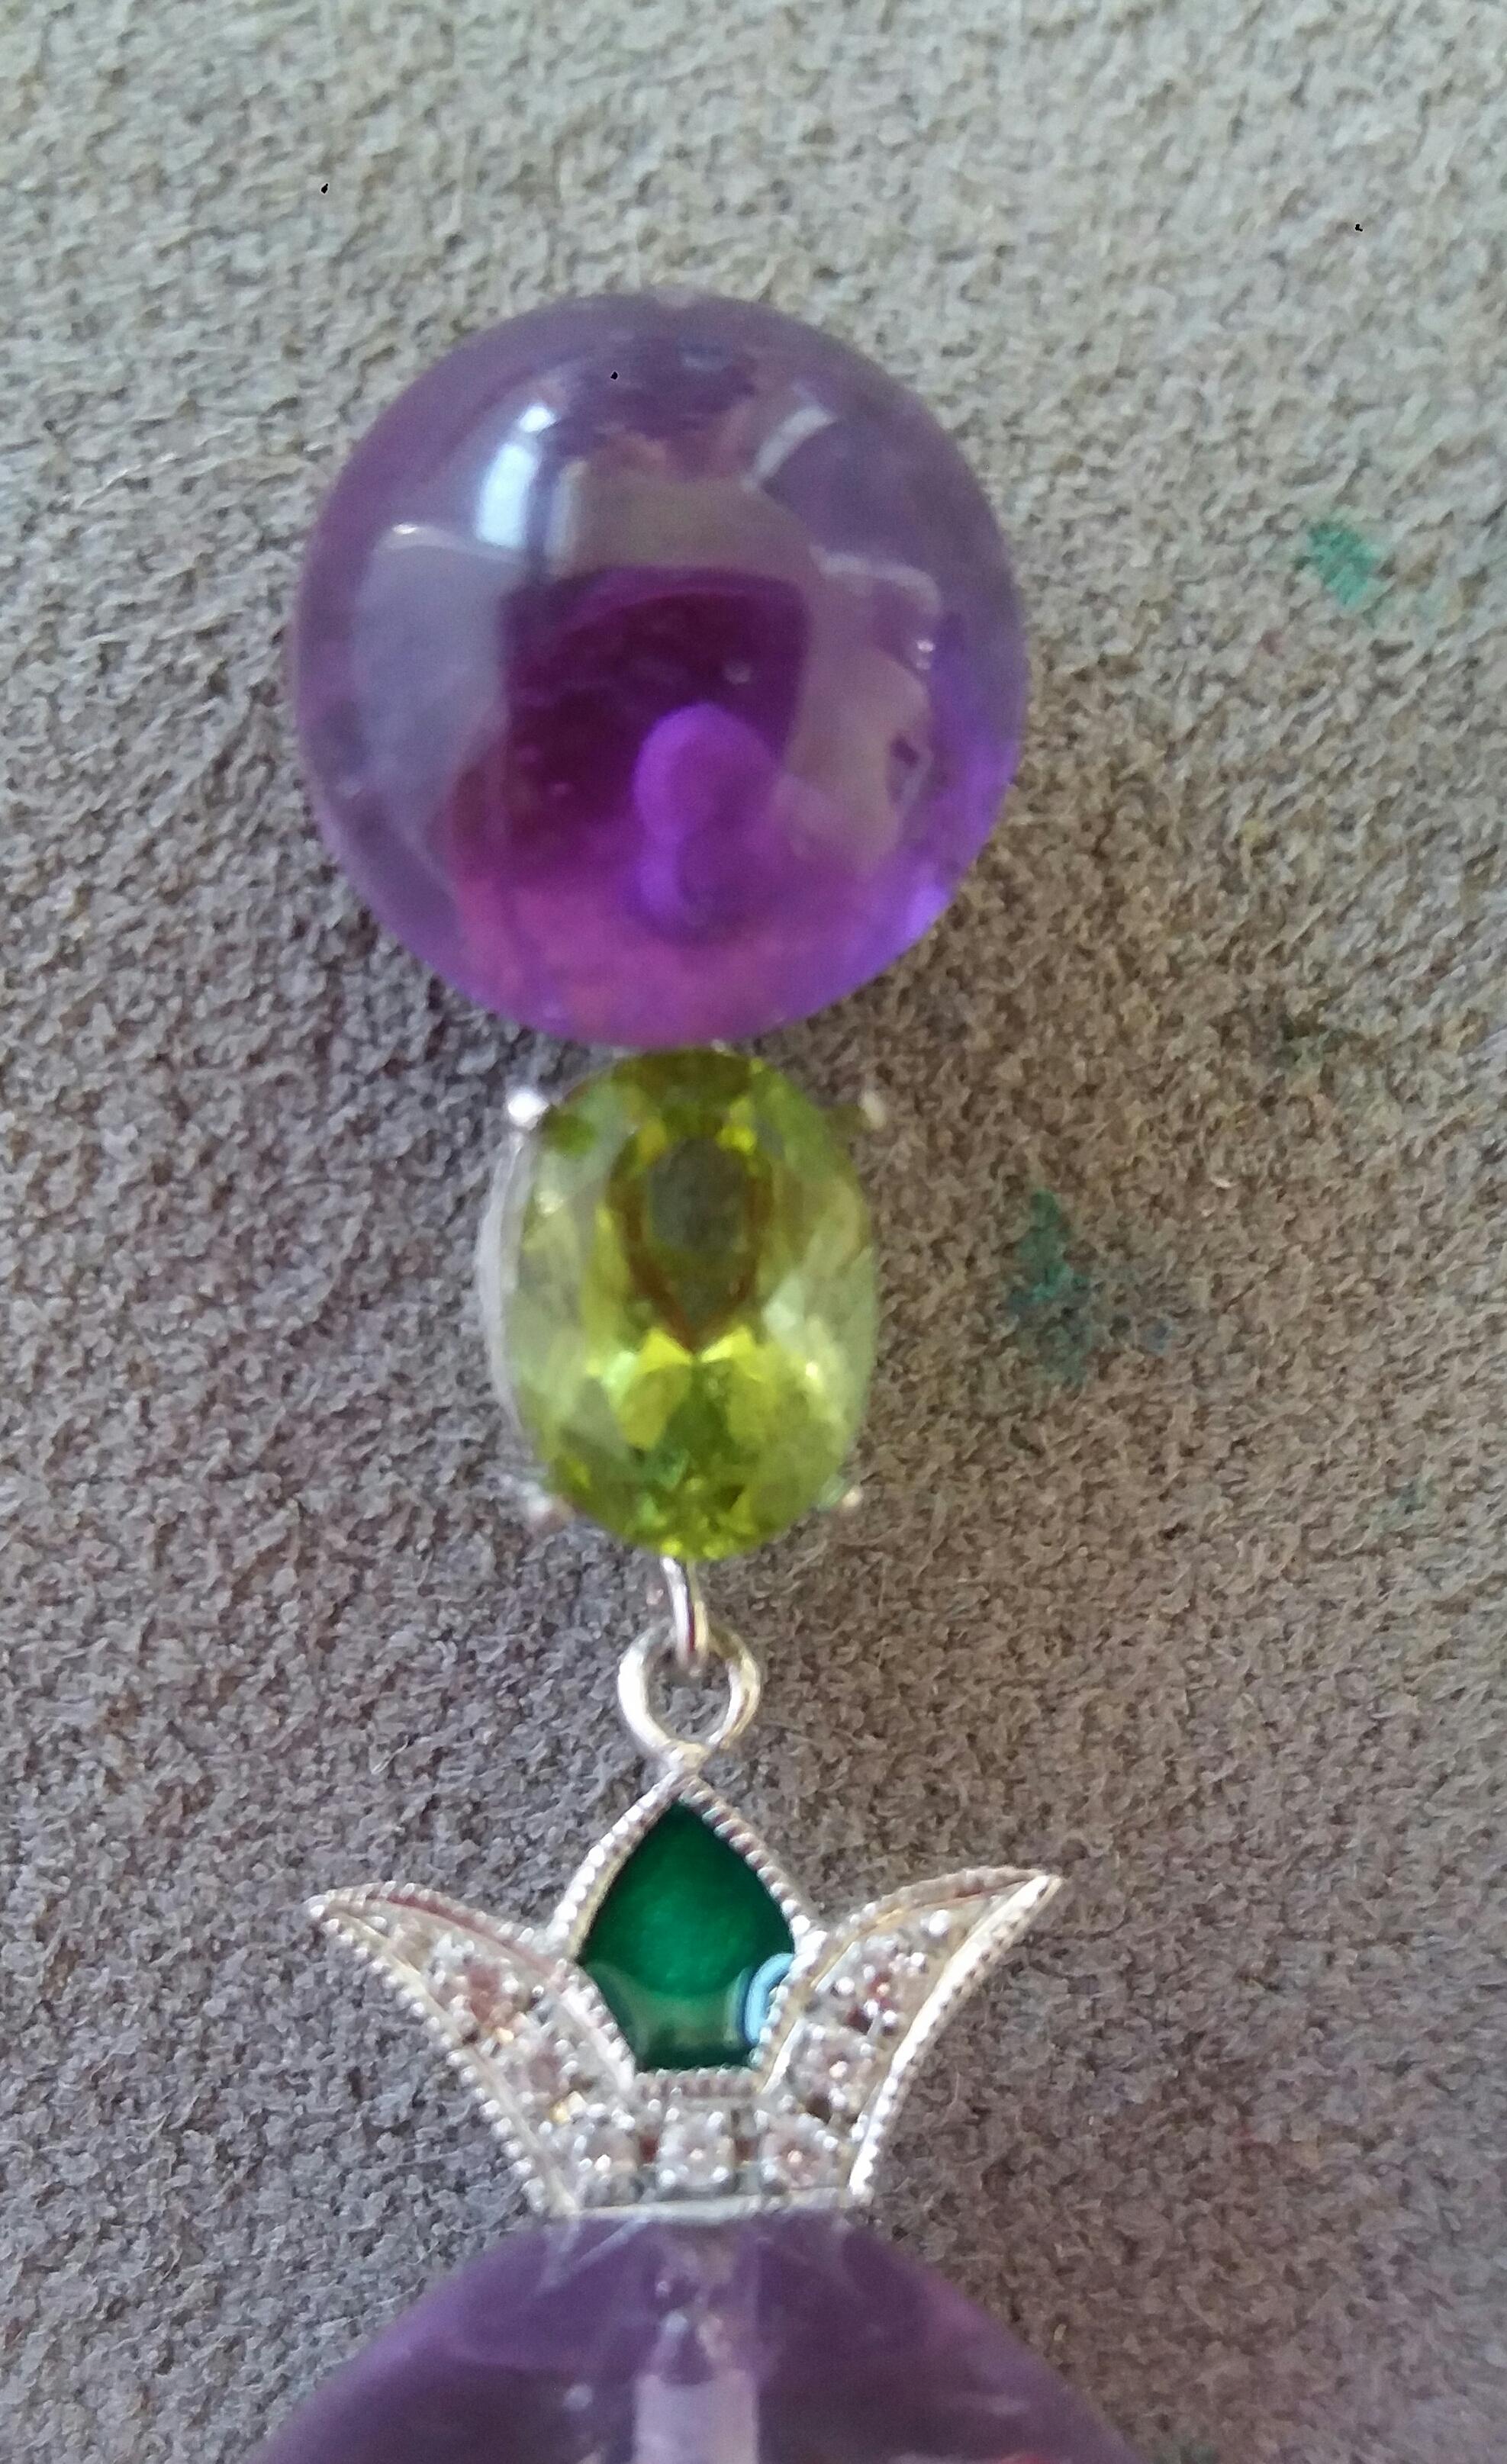 The upper part is composed of 2 amethyst buttons 10 mm diameter. from which are suspended  a pair of faceted peridots and 2 elements in white gold diamonds and green enamel, at the bottom we have 2 large Amethyst round drops measuring 17 x 18